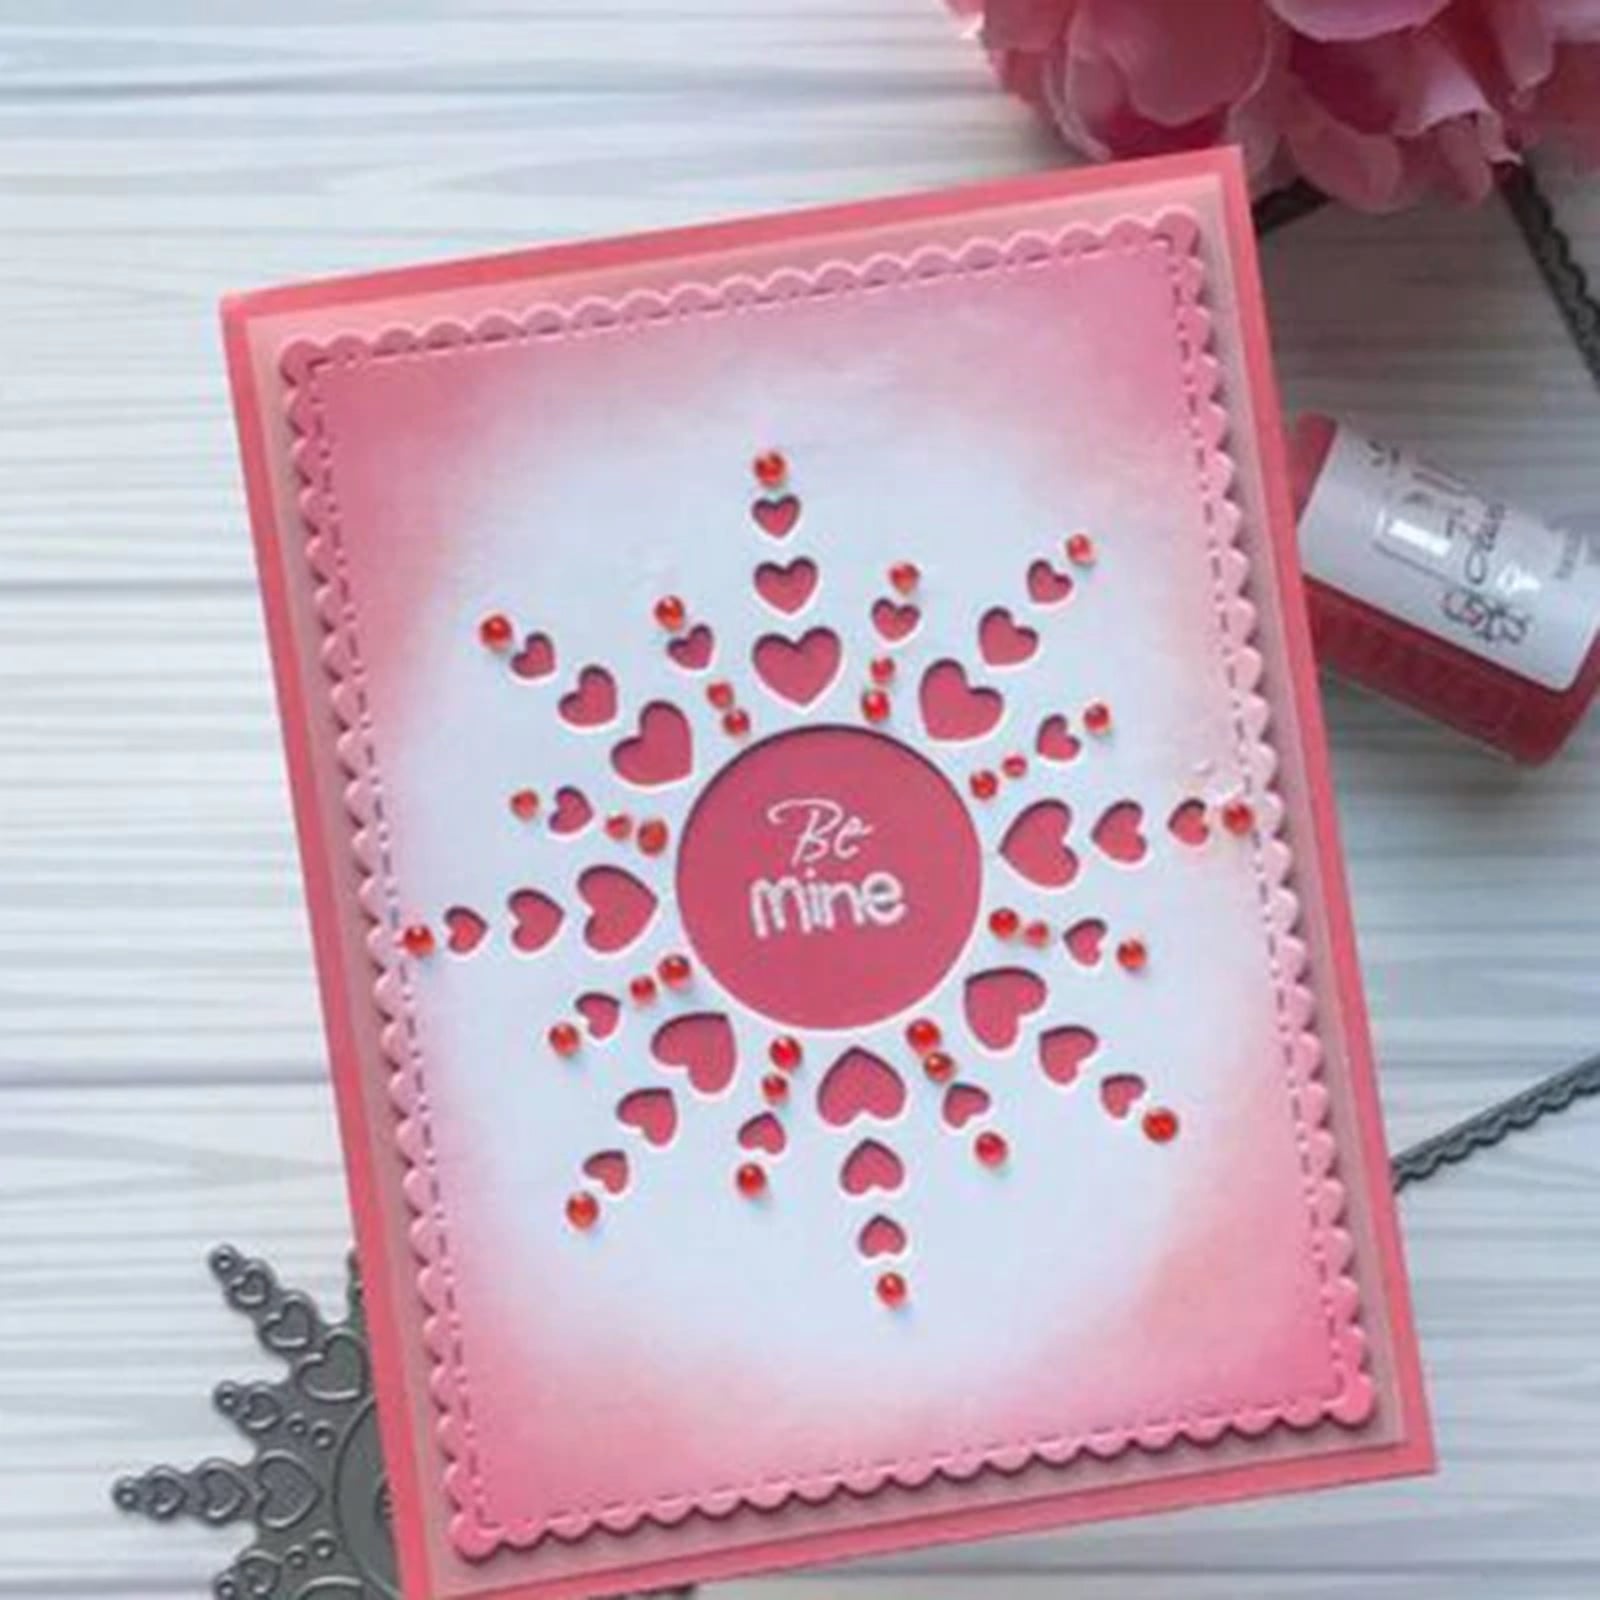 Cutout Hearts Snowflake Cutting & Embossing Die